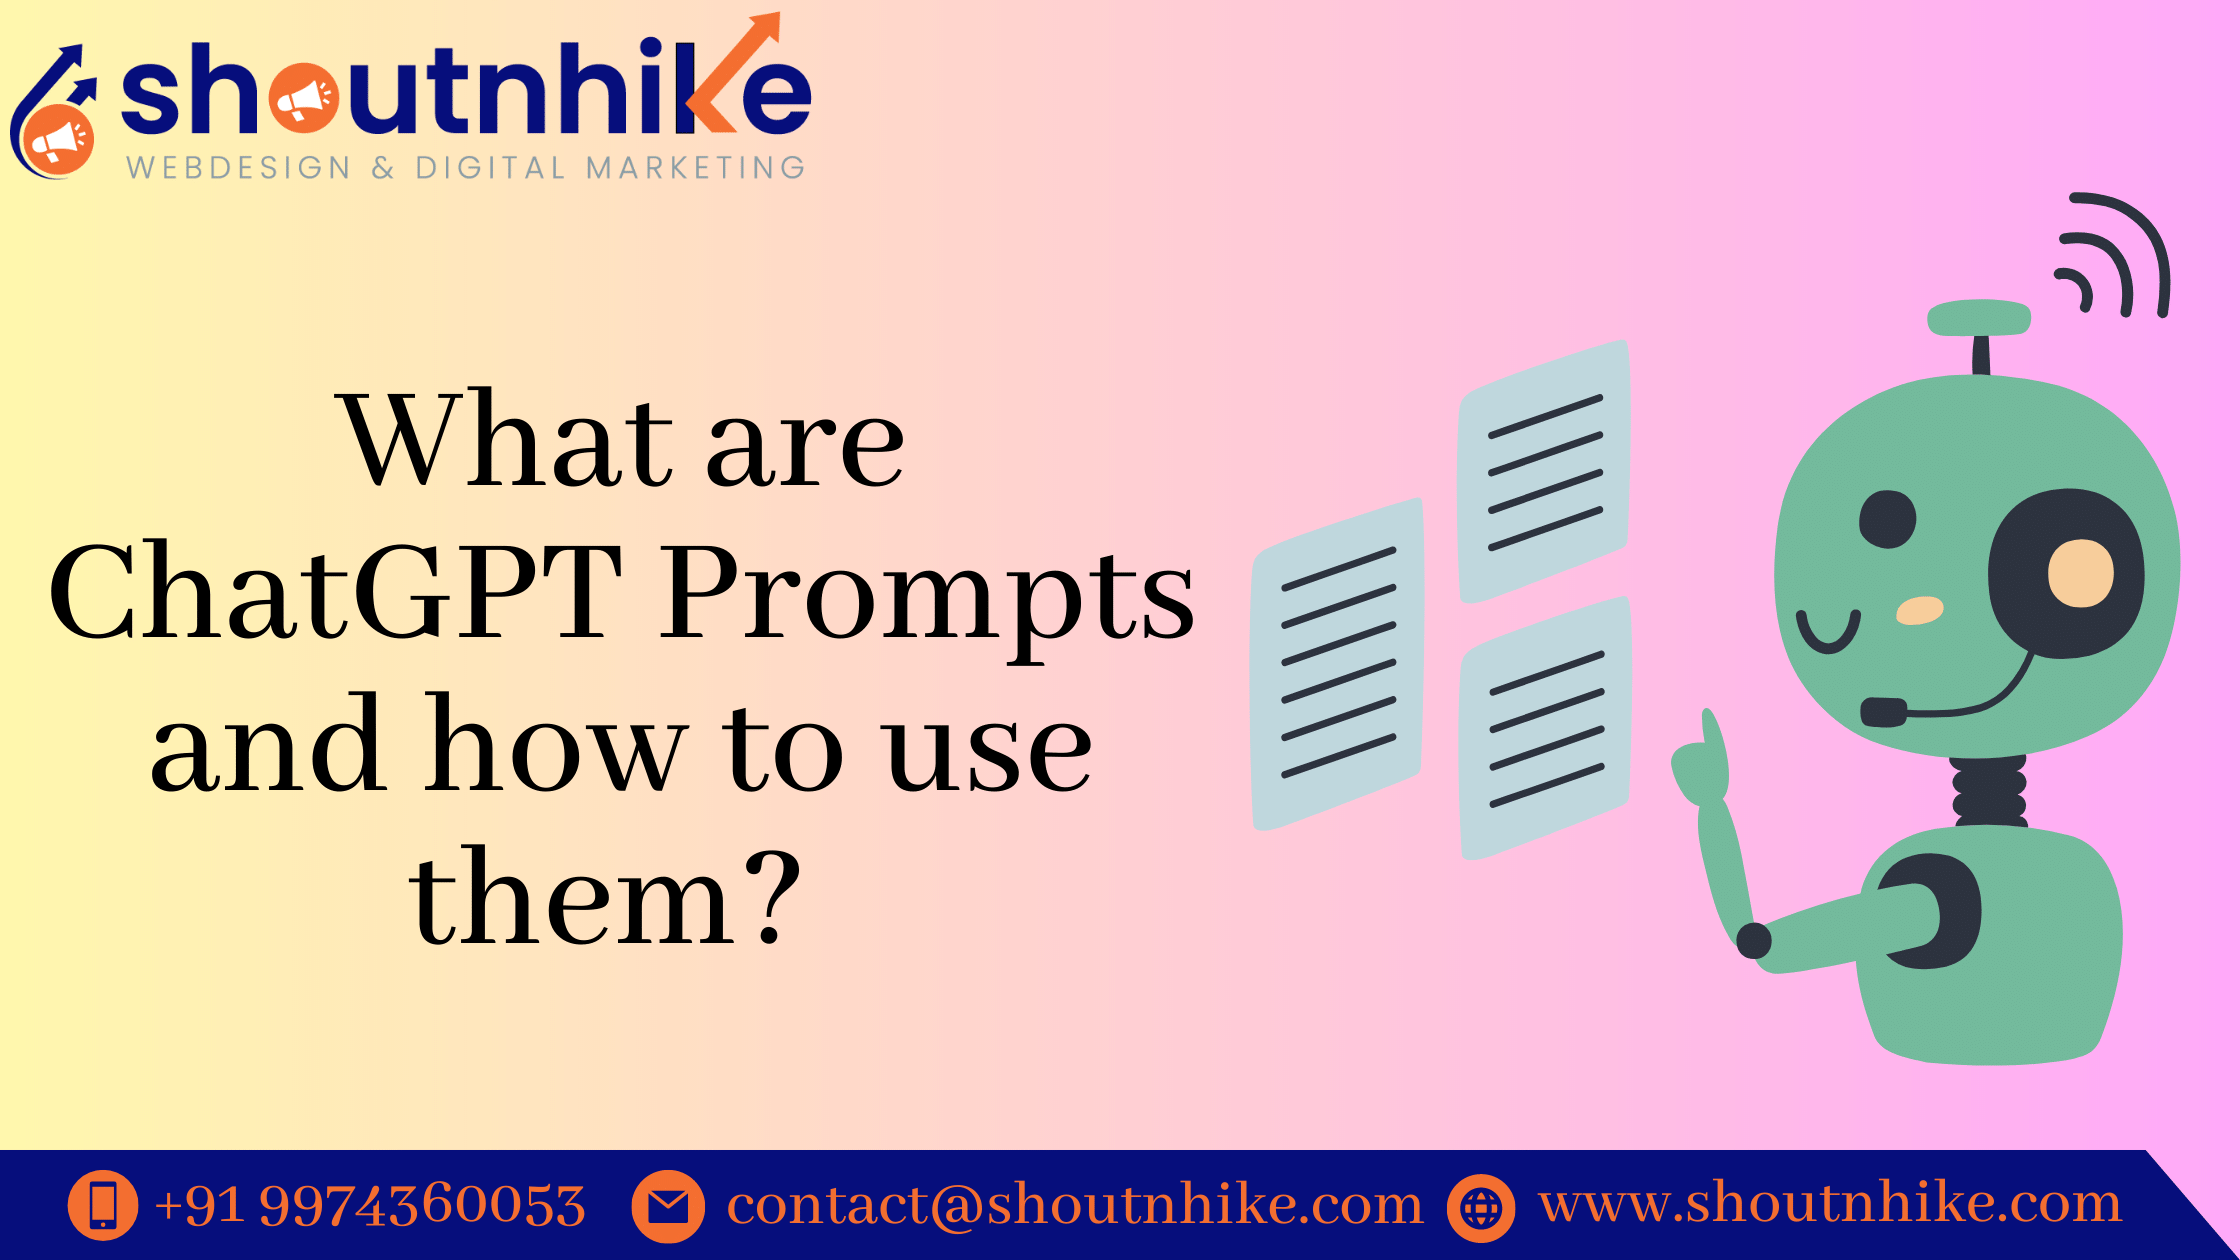 What are ChatGPT Prompts and how to use them?